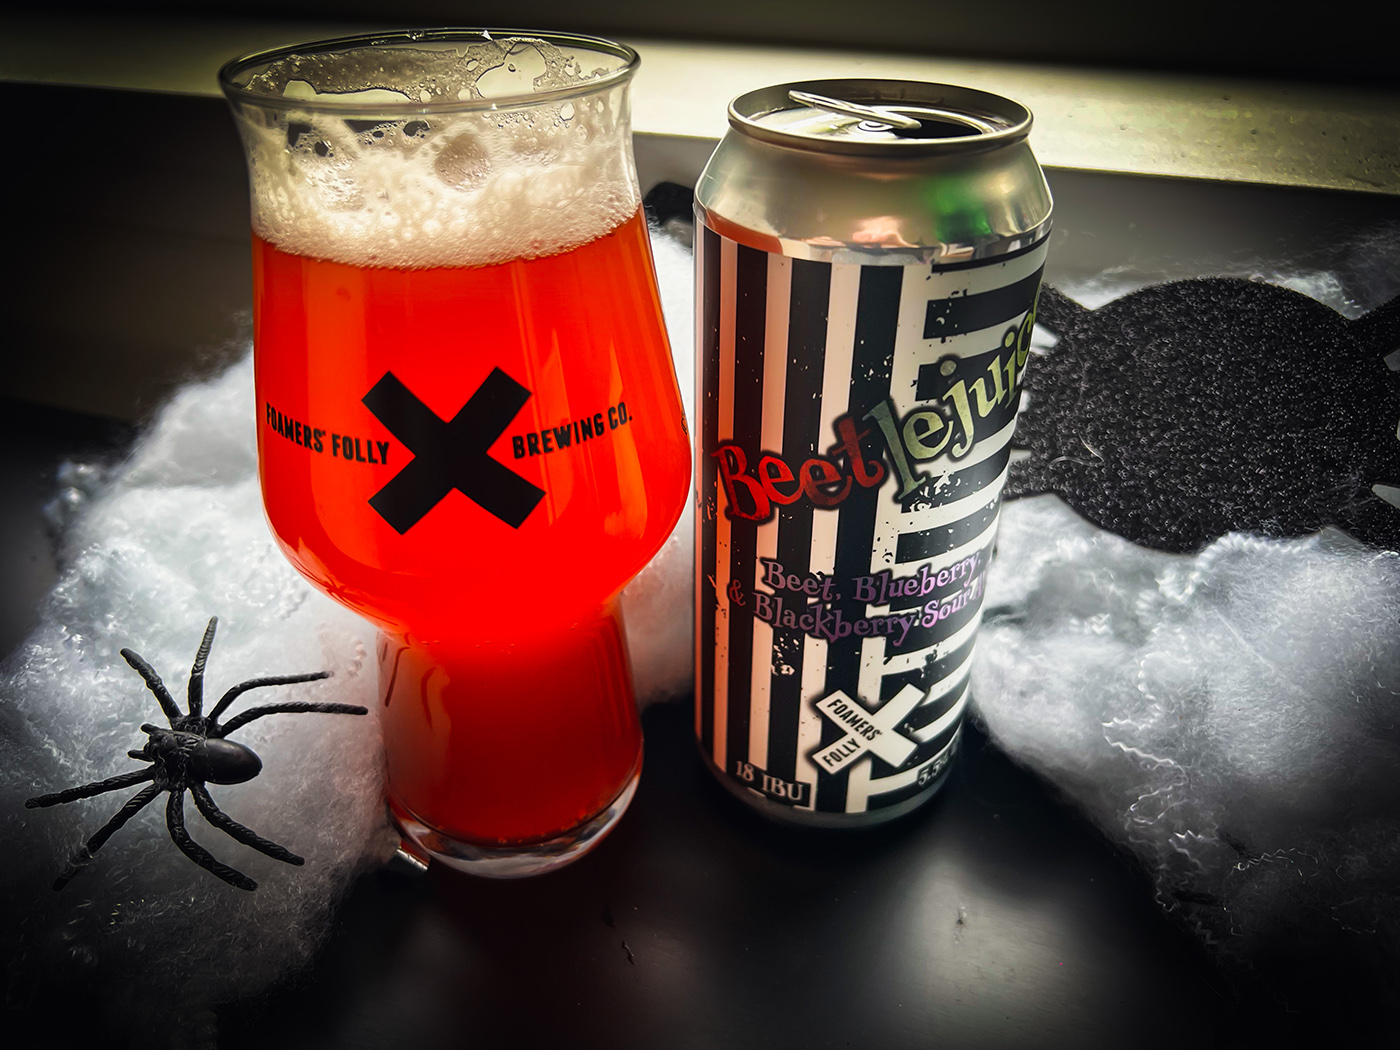 Beetlejuice Sour Ale with Beets, Blueberries, and Blackberries – Now Available!